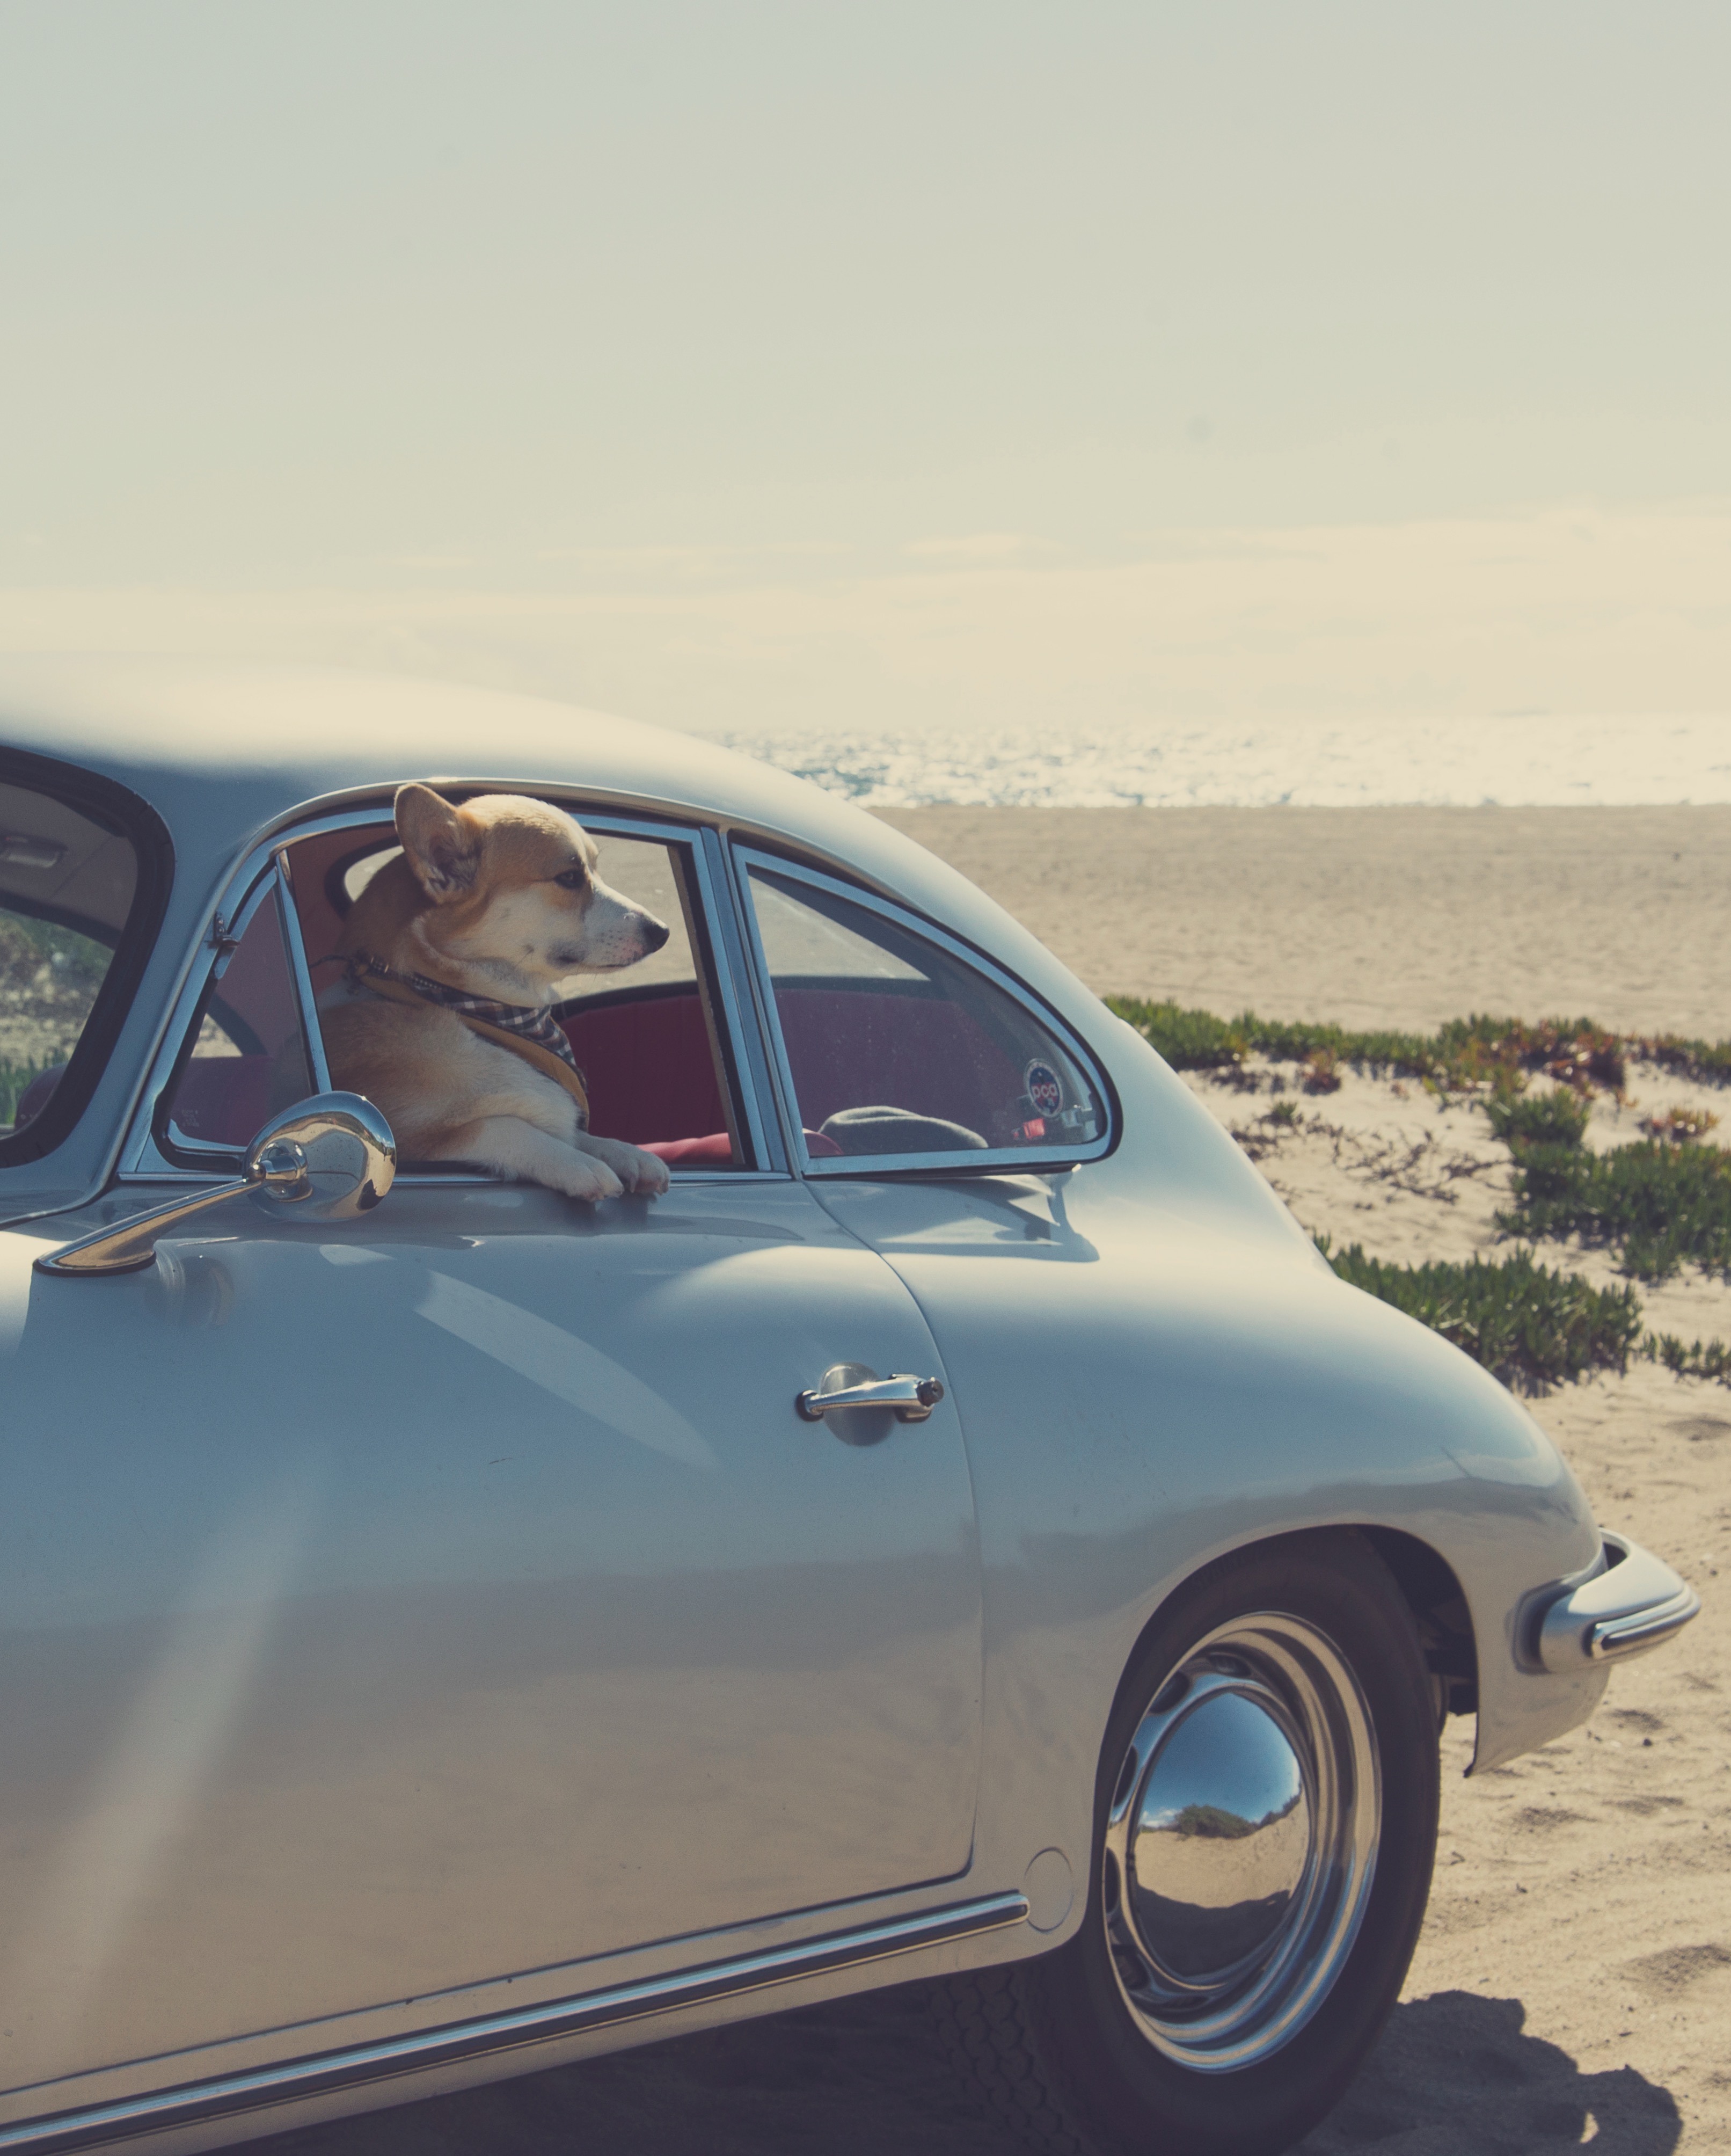 Corgi dog hanging out window of silver Porsche, beach in behind